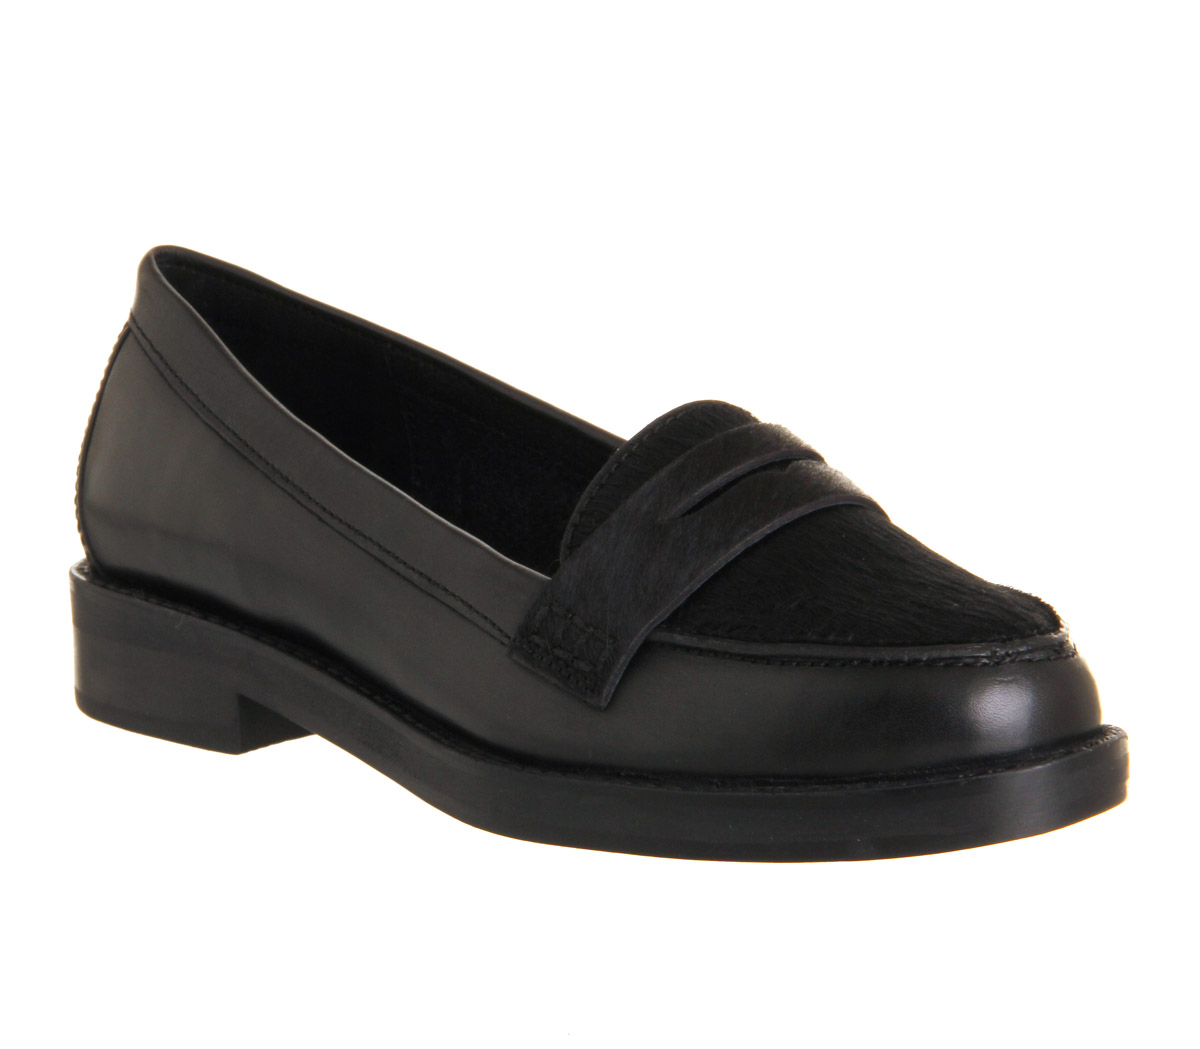 OFFICEVictorious Penny loafersBlack Pony Black Leather